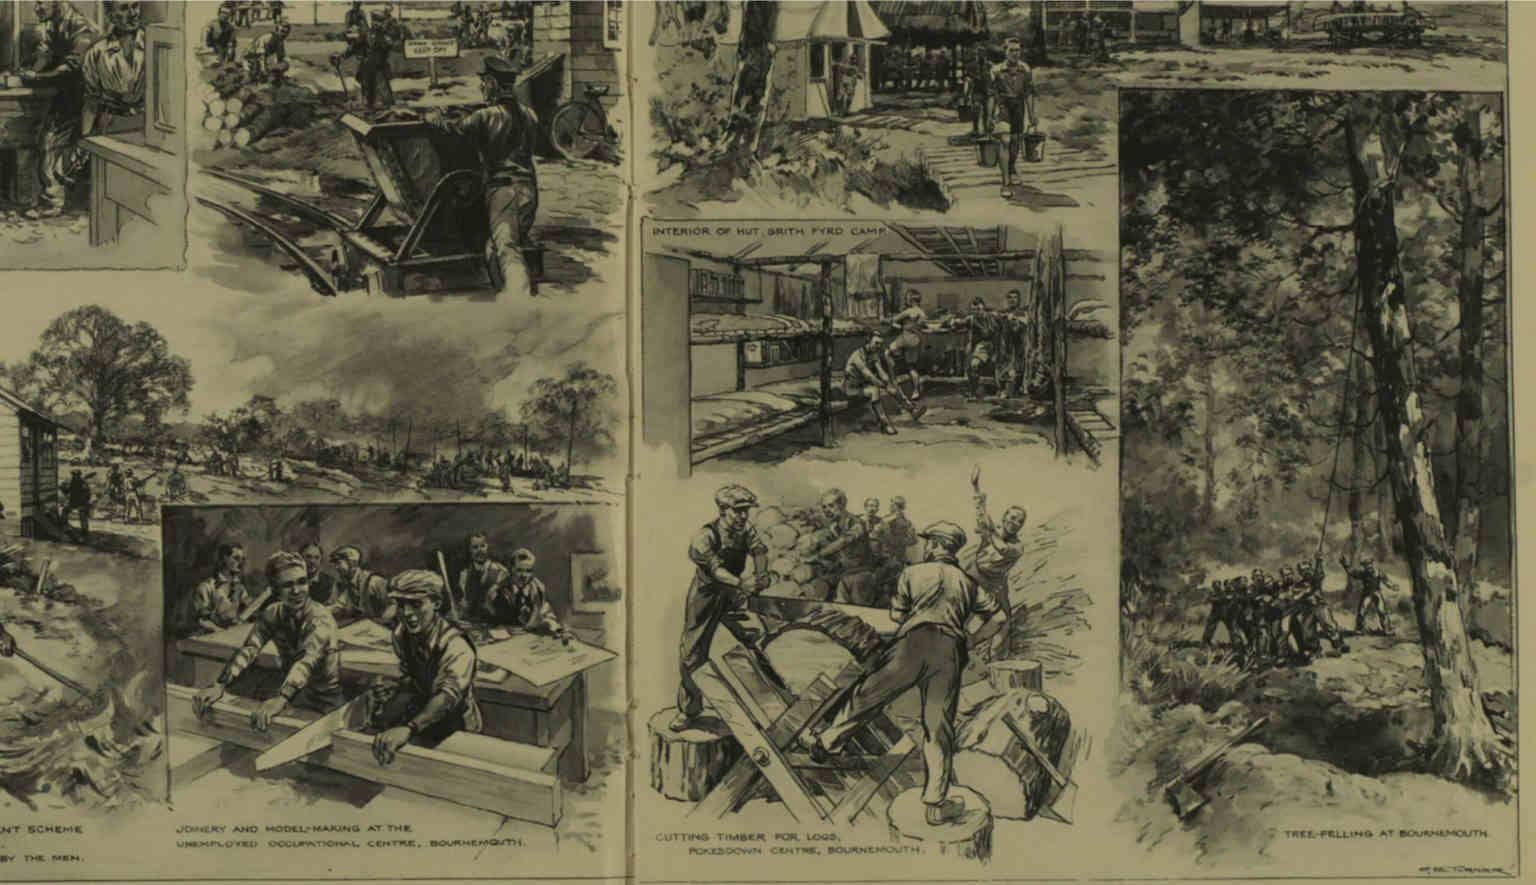 drawing of men cutting timber at the Pokesdown Centre in a scheme for the unemployed, from Illustrated London News, Saturday 8th April 1933